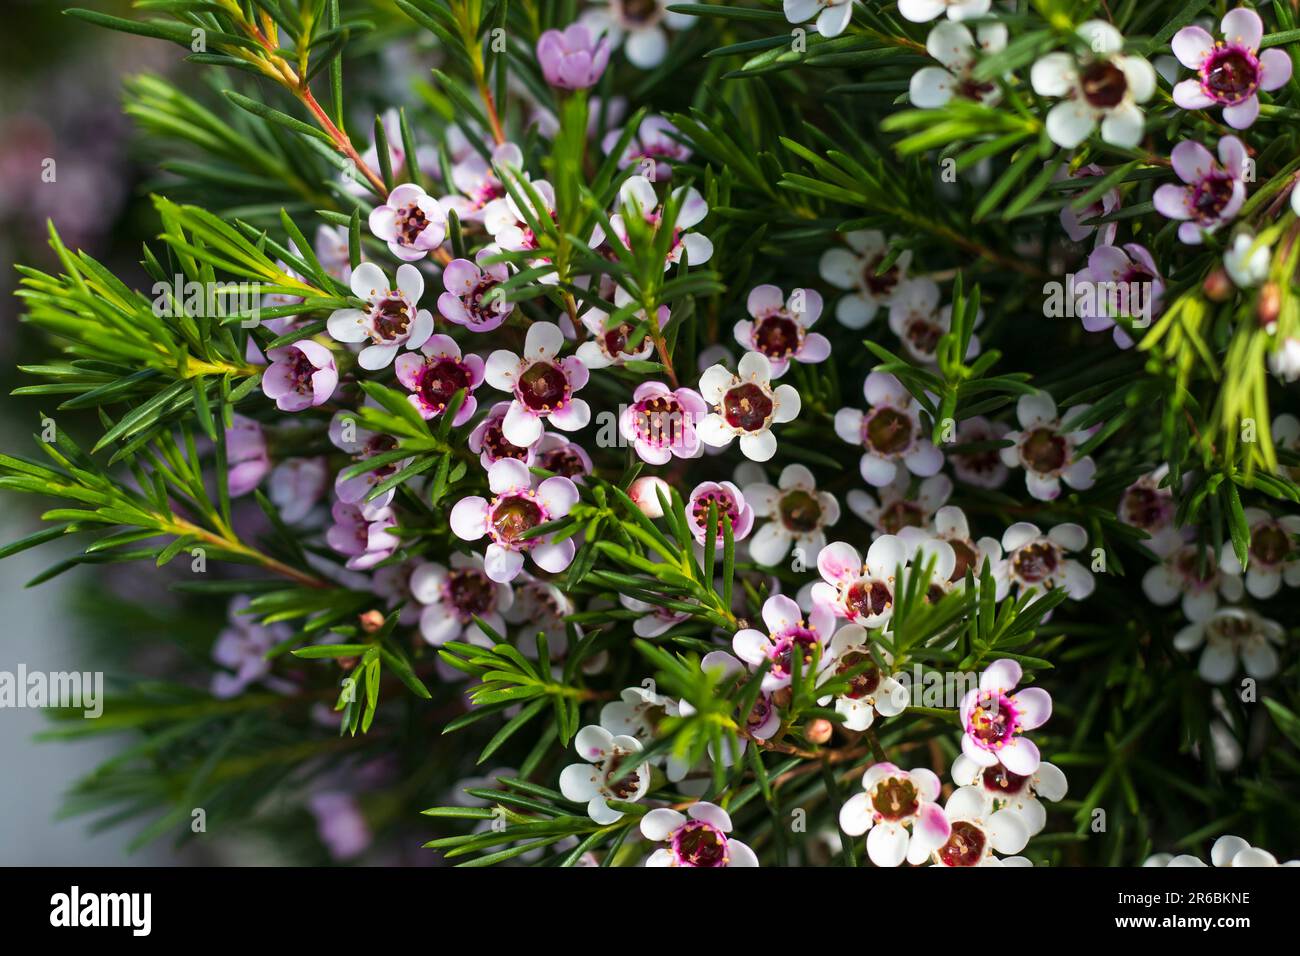 The lovely pink flowers of the Australian native plant, Chamelaucium ucinatum in close up. Also known as Wax Flower. Stock Photo